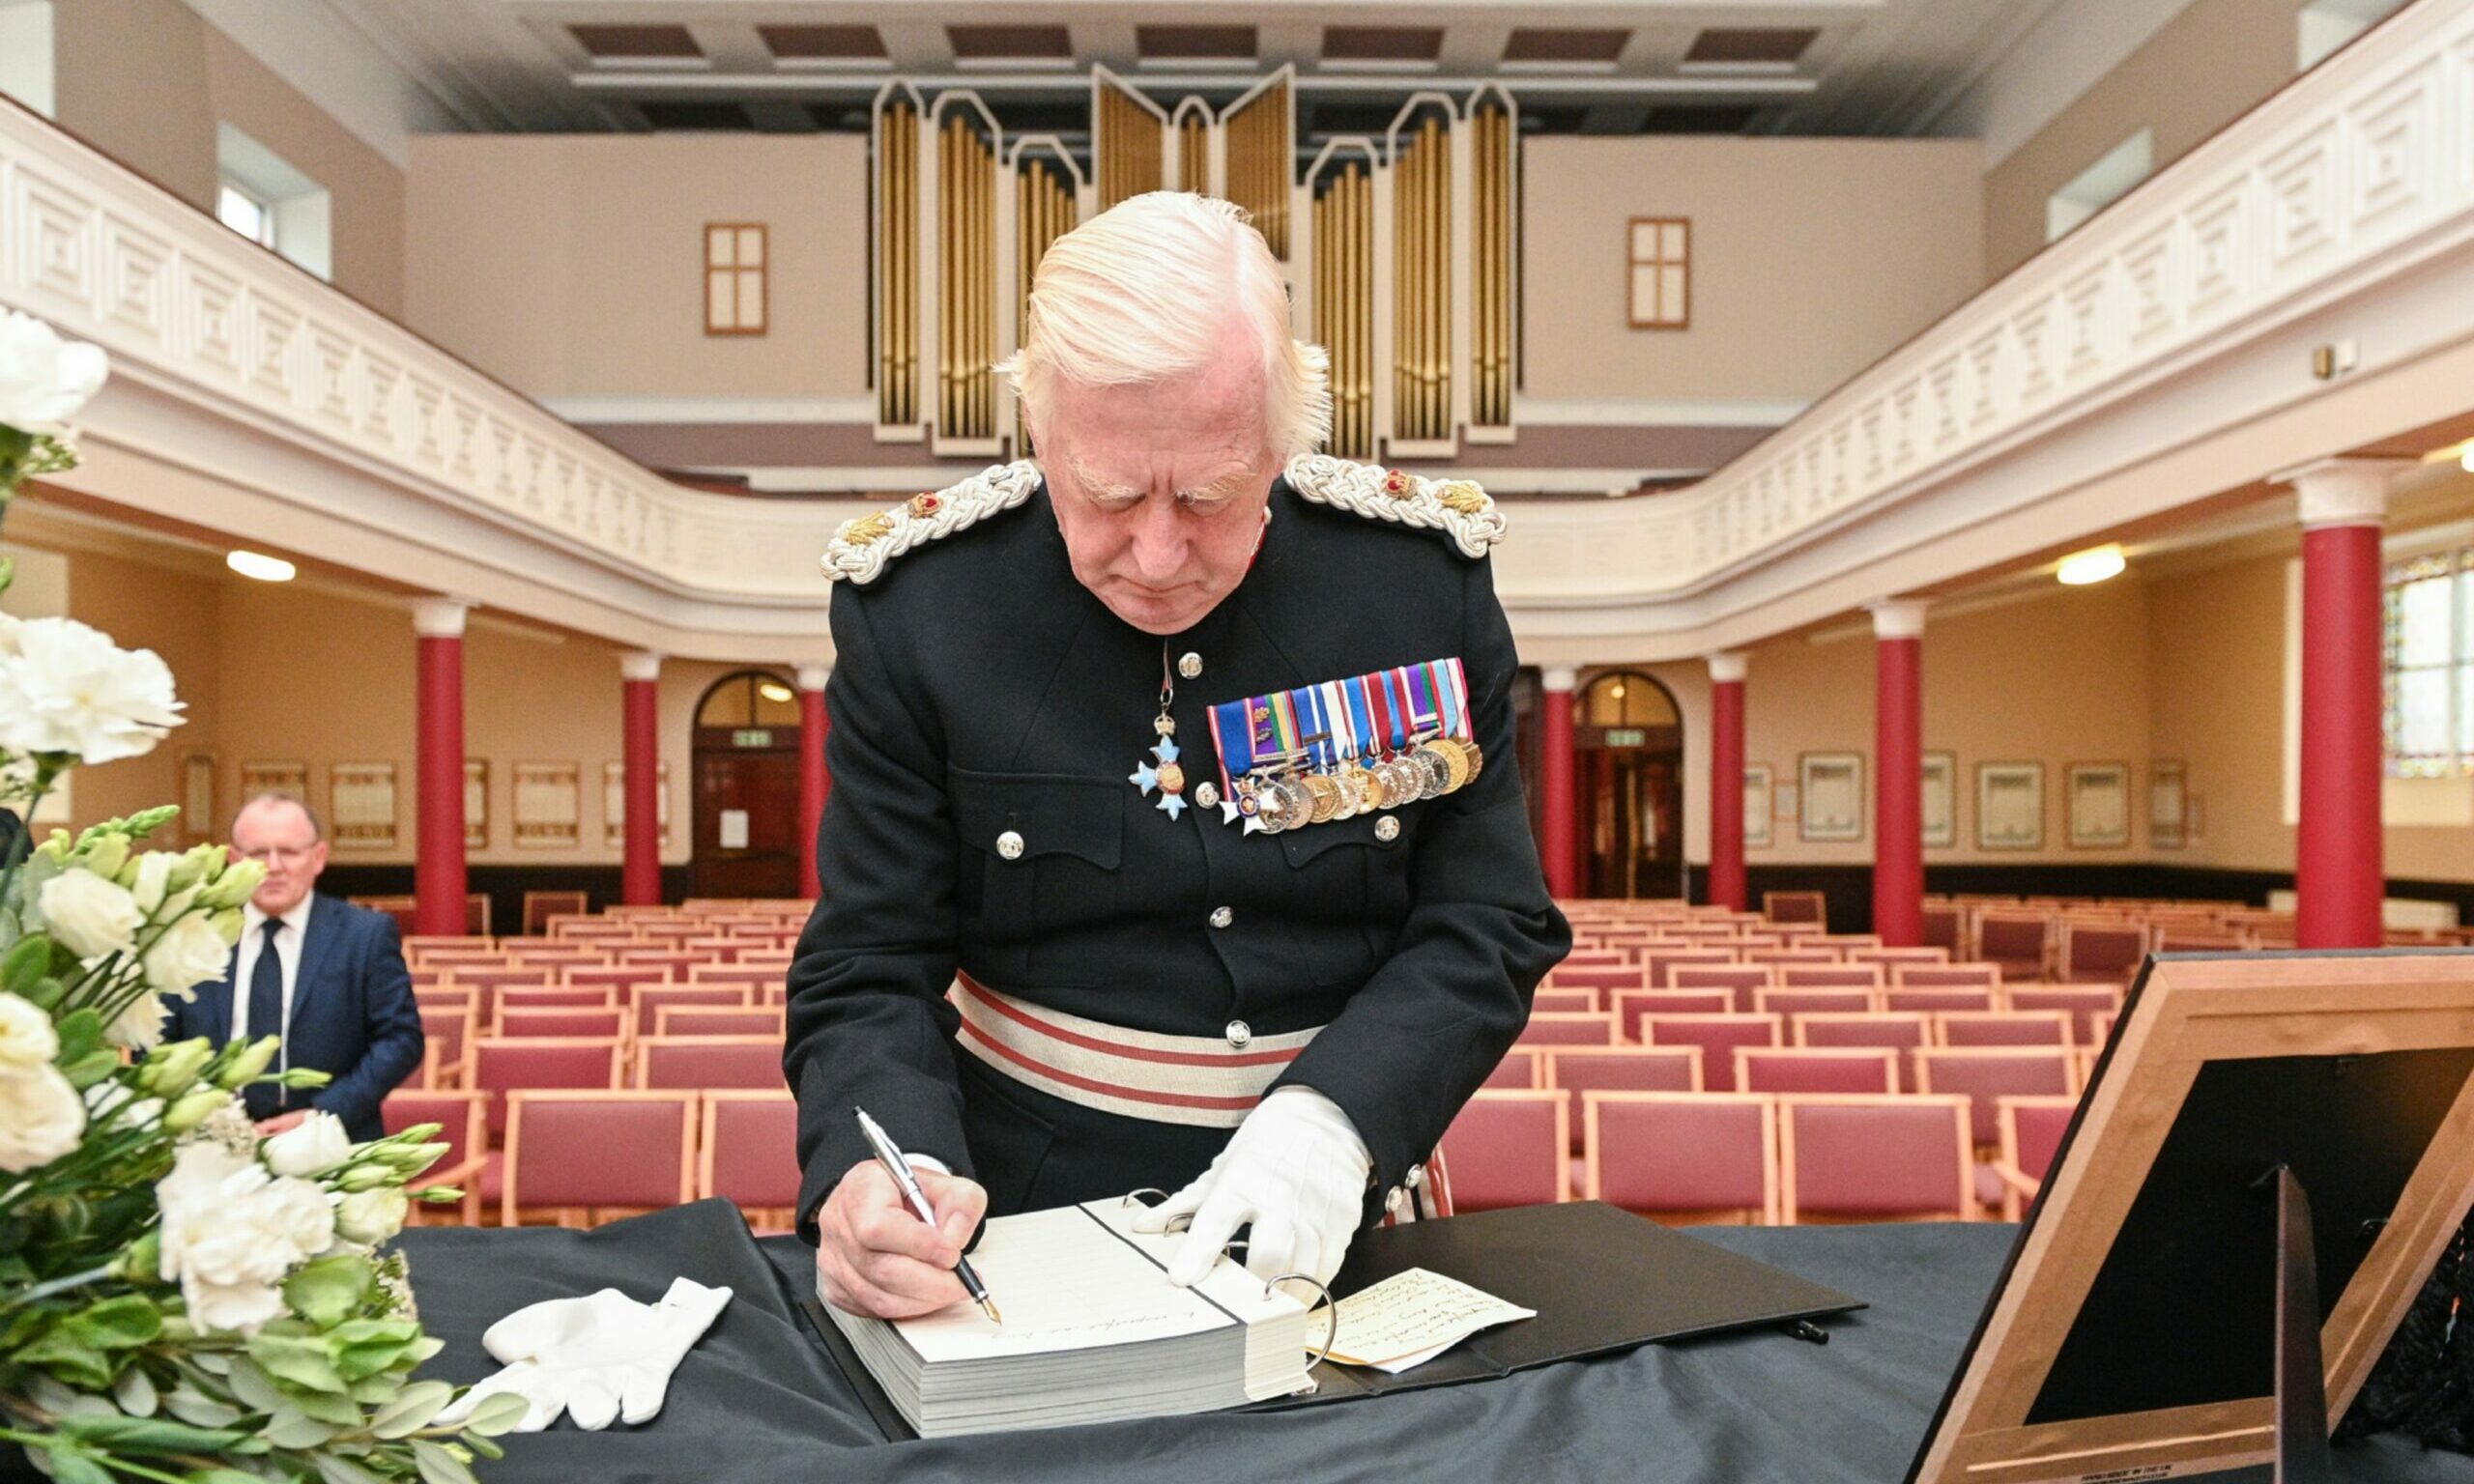 Looking from rear of St Giles Church at Moray Lord Lieutenant Seymour Monro in military uniform signing book of condolence.